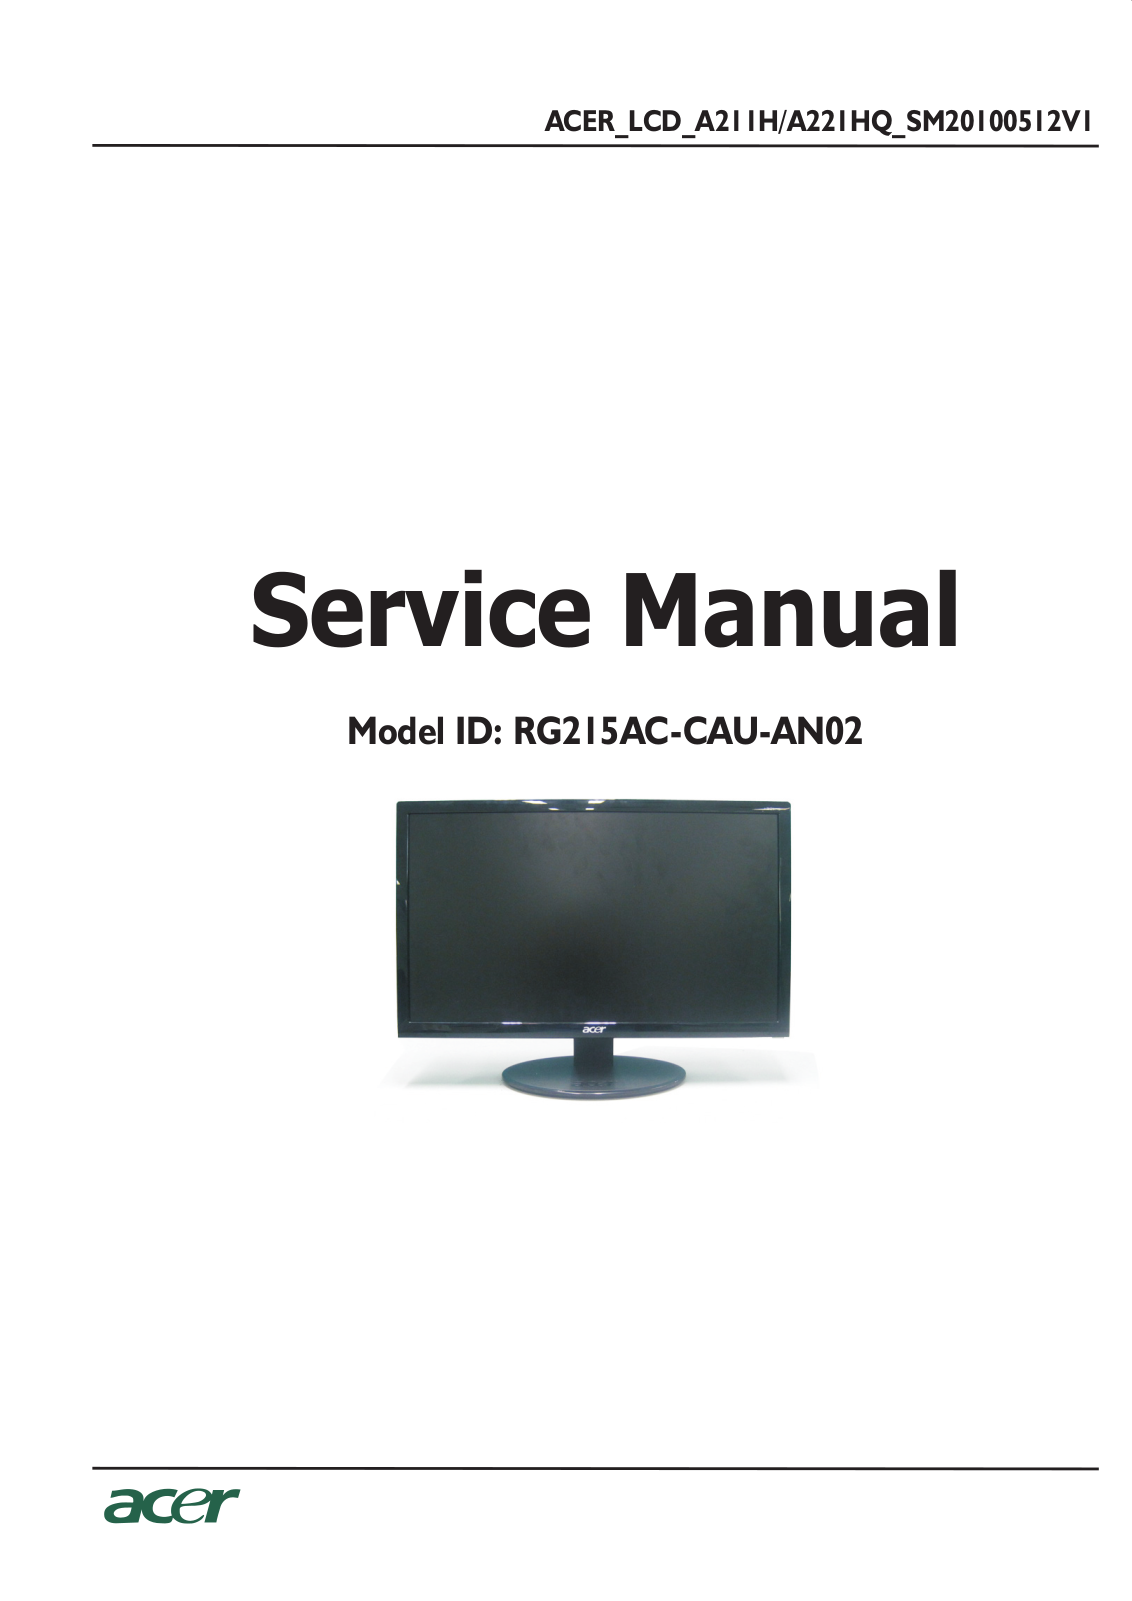 Acer LCD A211H, A221HQ Service manual